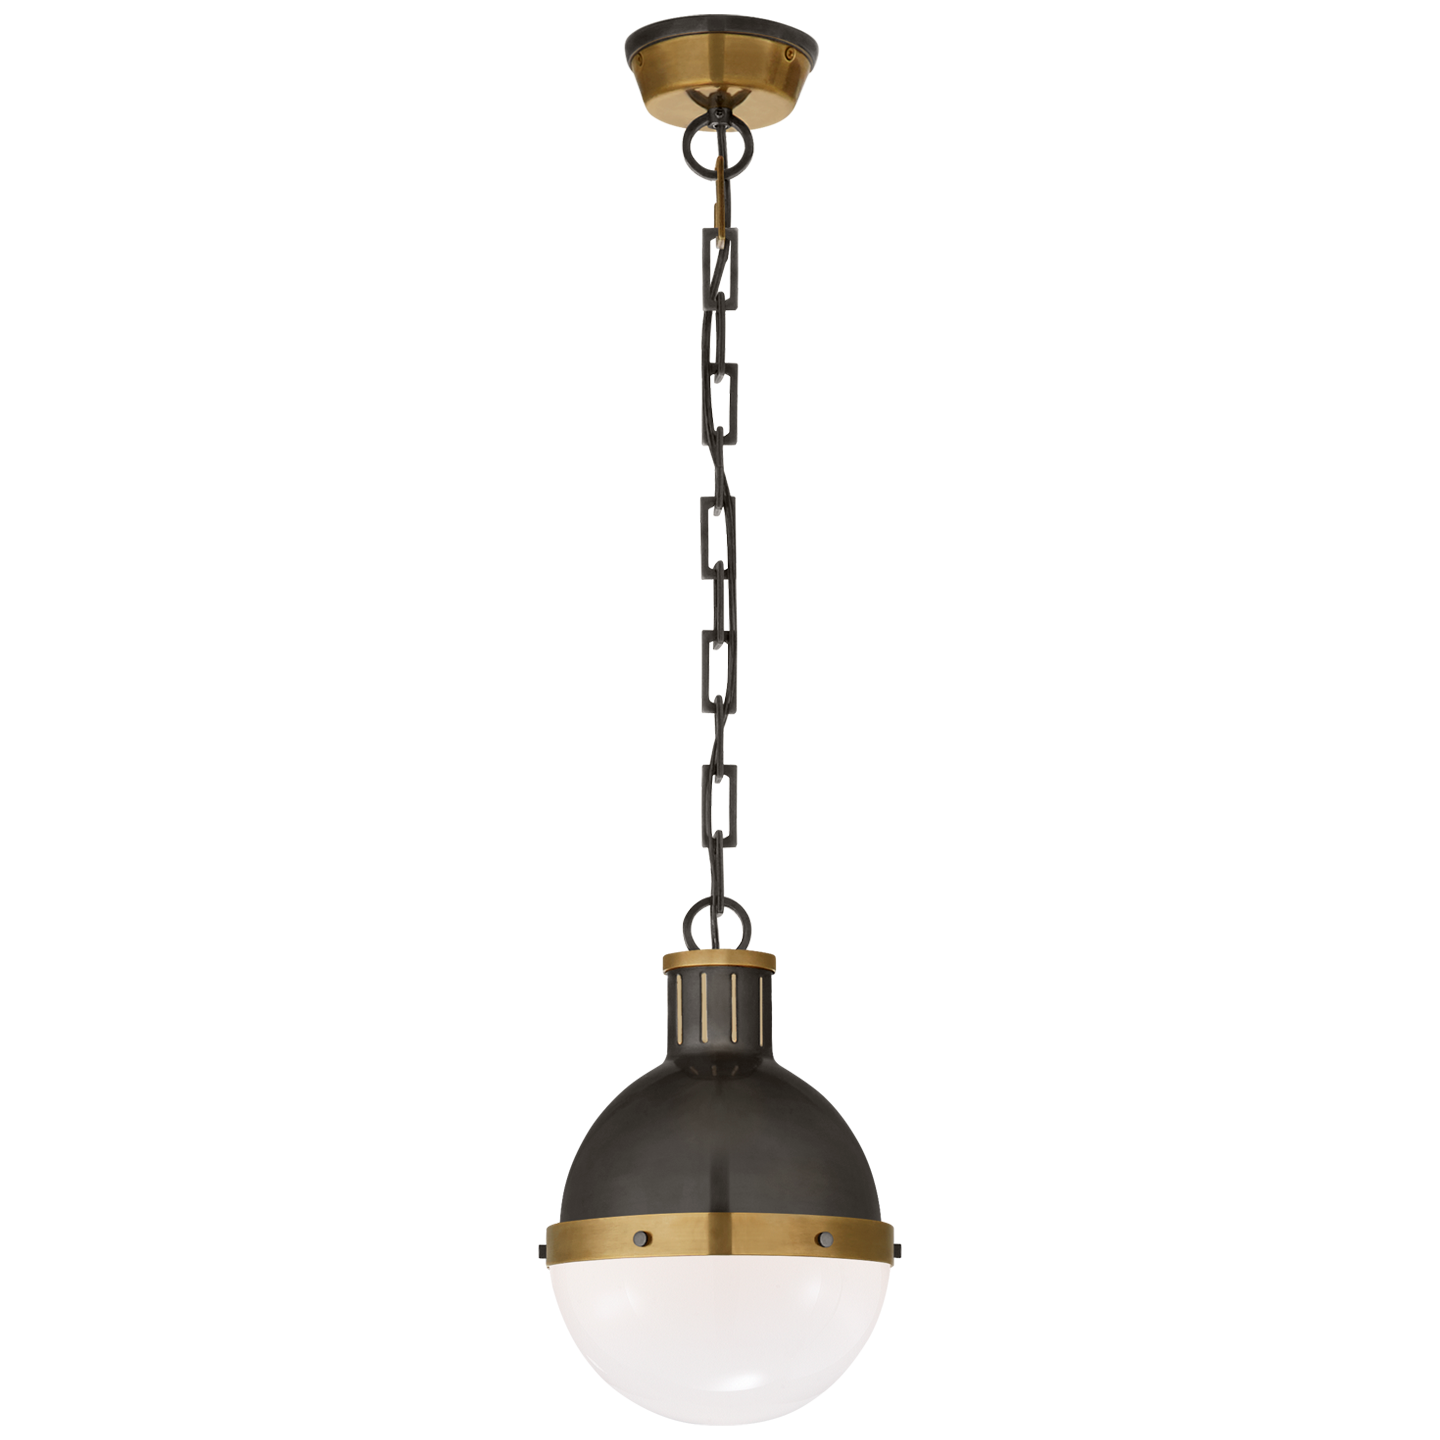 We love the white glass globe shade on this Hicks Small Pendant. Hang it over your kitchen island or sink to bring the space an industrial feel.   Designer: Thomas O'Brien  Height: 11.75" Width: 8.5" Canopy: 4.75" Round Socket: E26 Keyless Wattage: 75 A